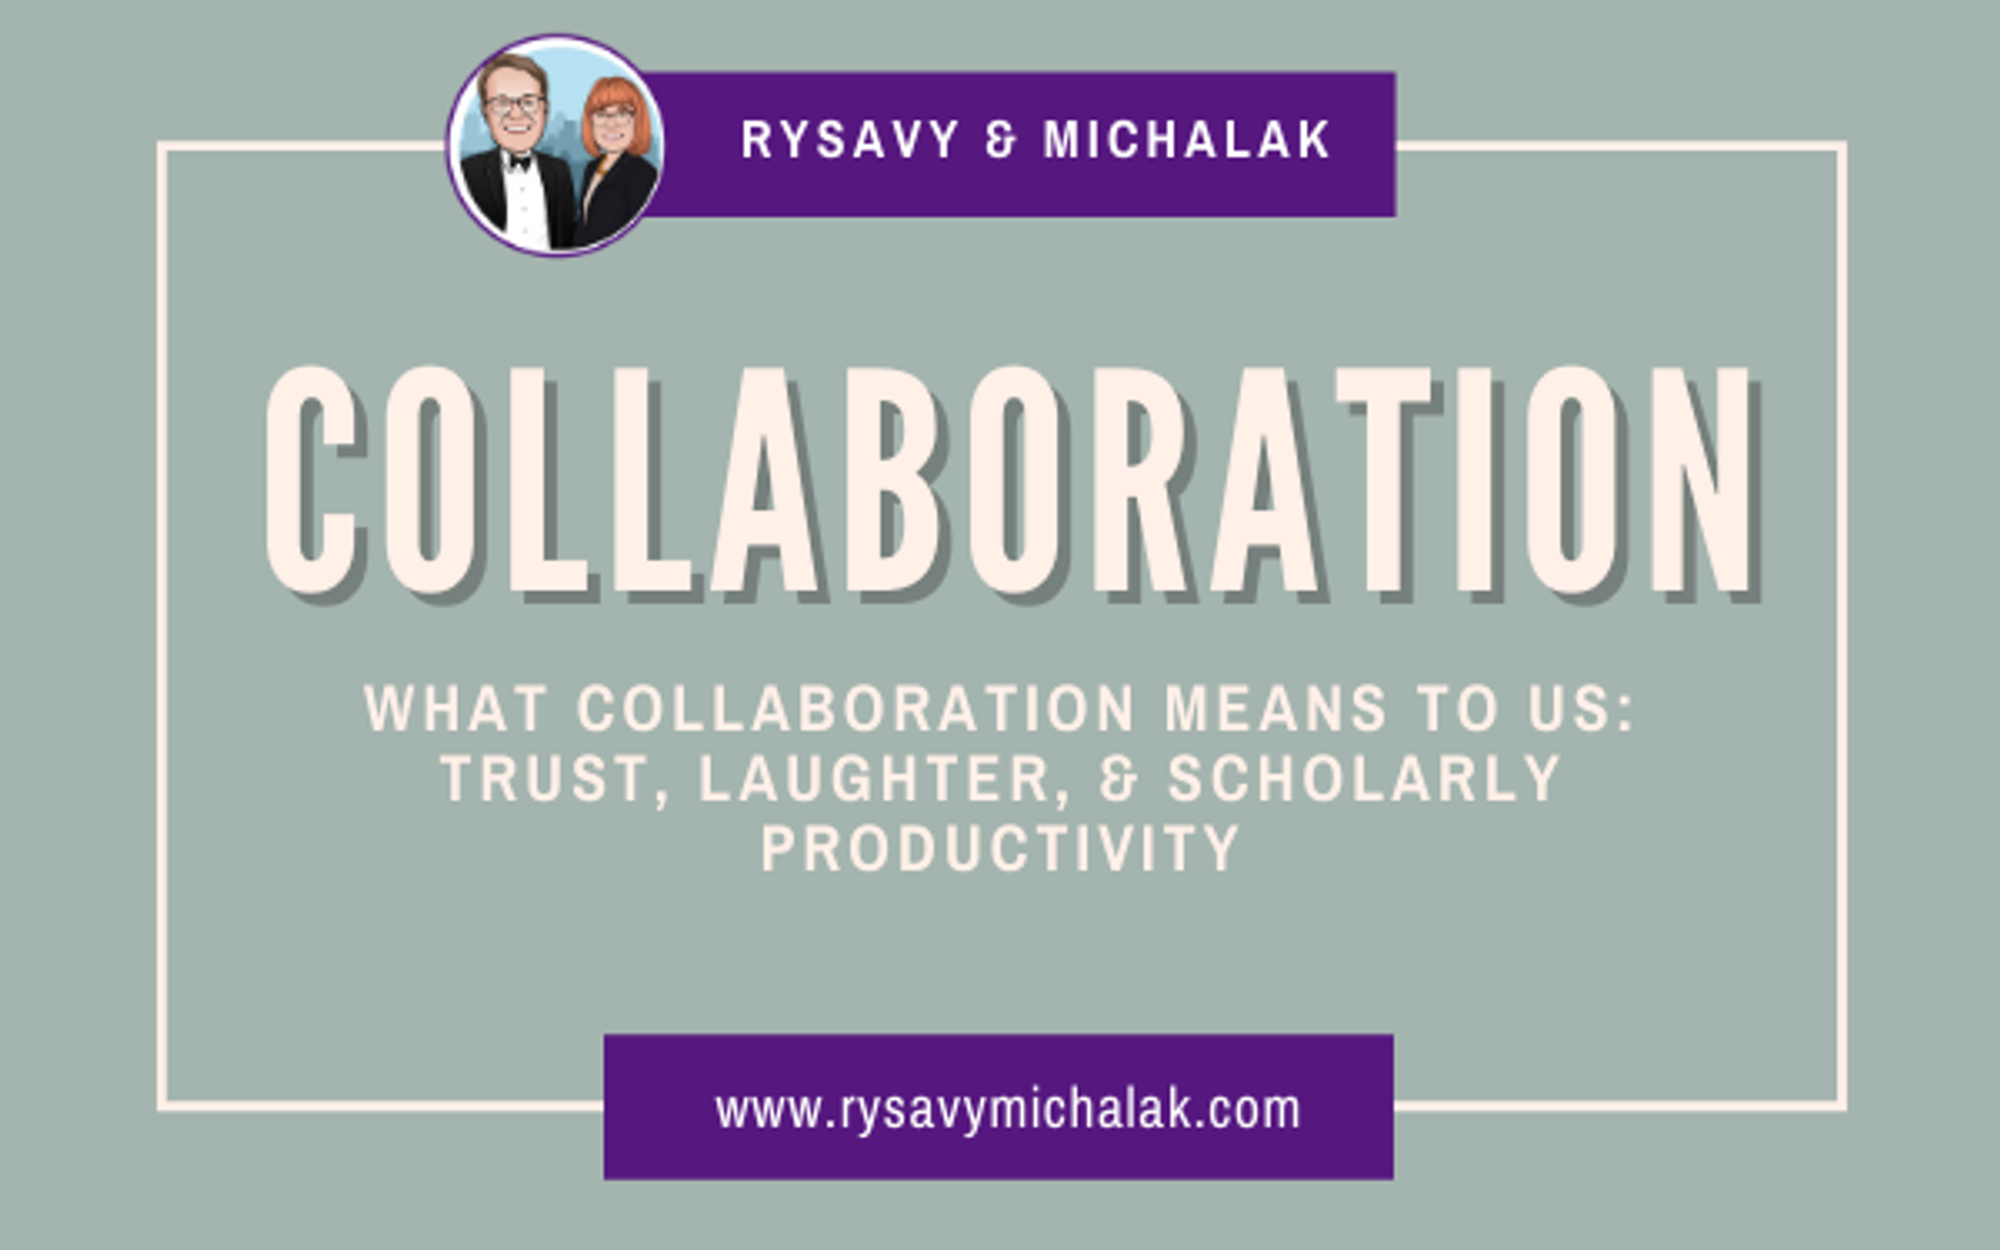 What Collaboration Means to Us: Trust, Laughter, & Scholarly Productivity